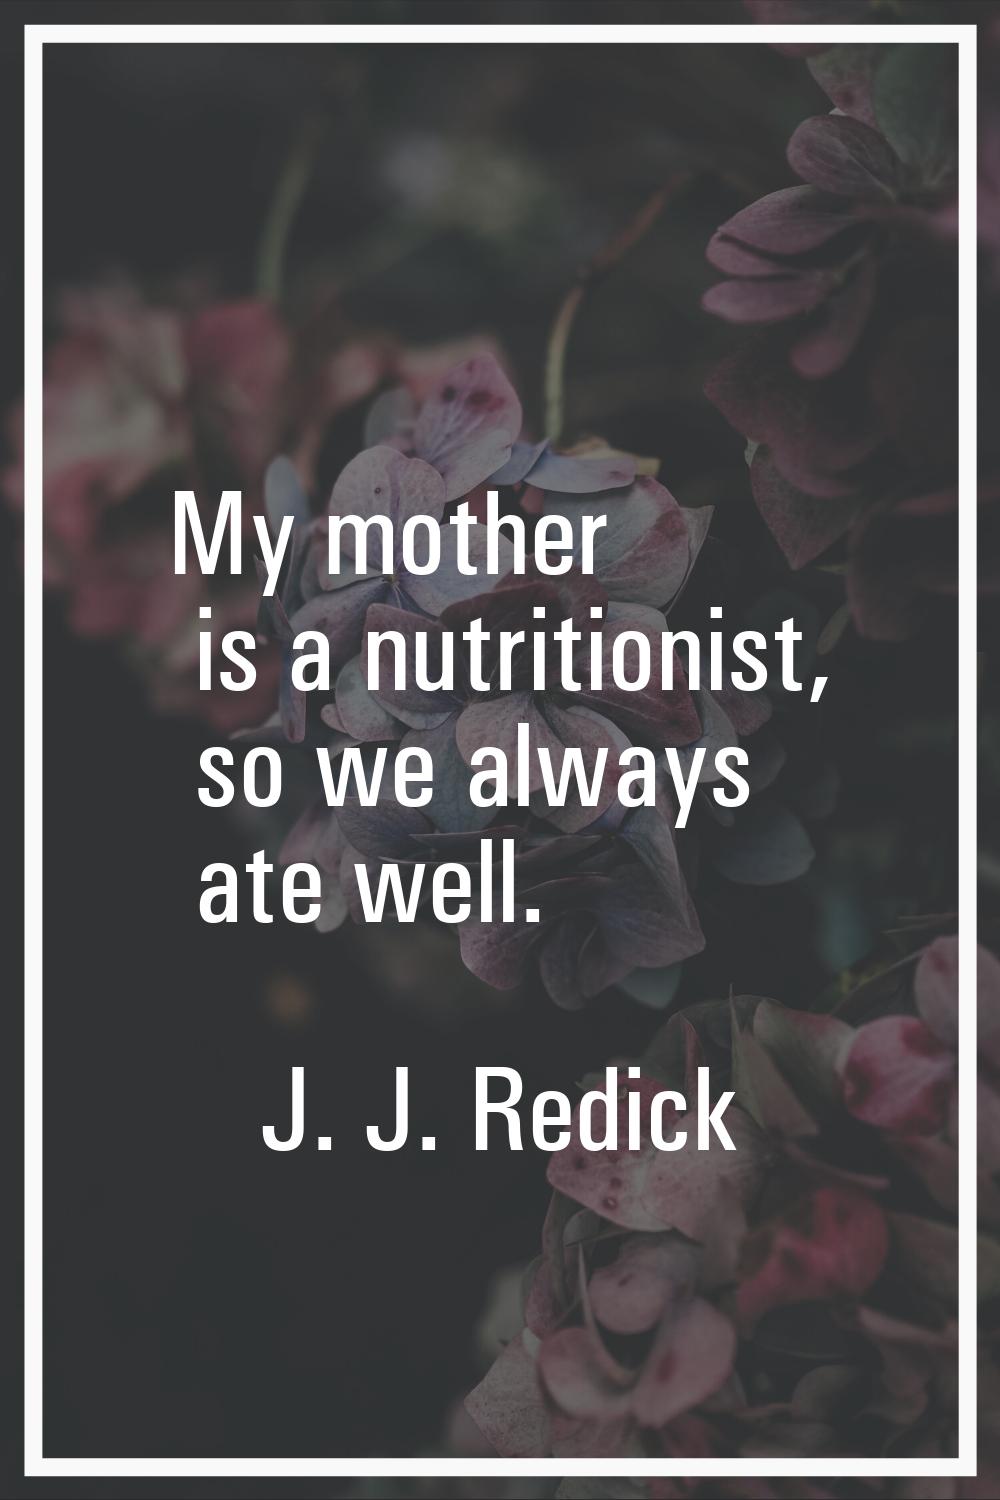 My mother is a nutritionist, so we always ate well.